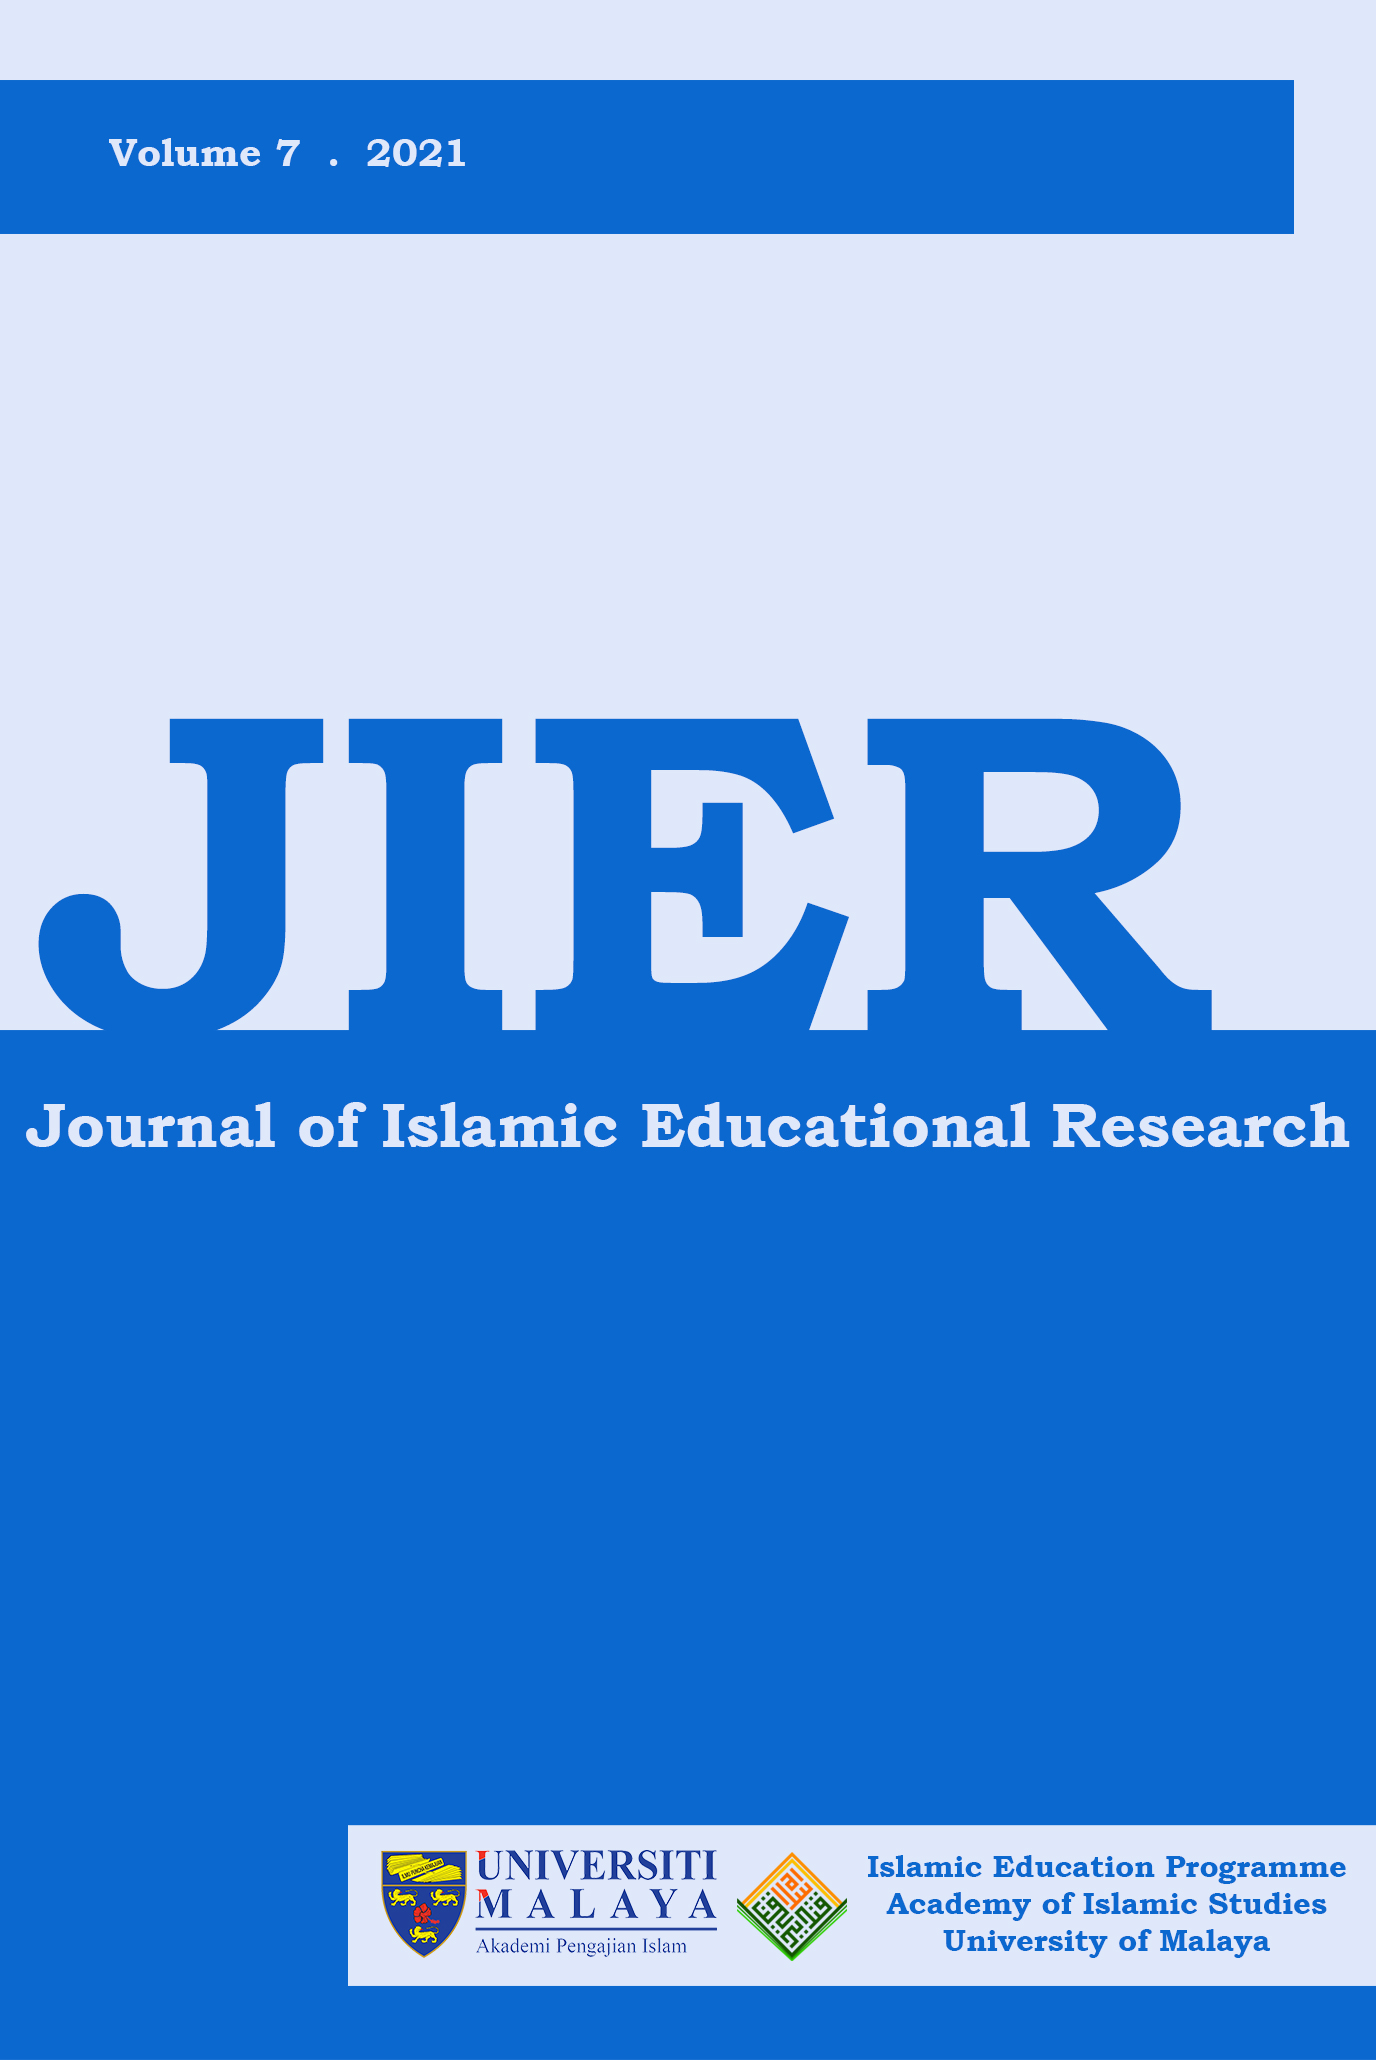 					View Vol. 7 (2021): Special Issue: Islamic Education During Covid-19 Pandemic
				